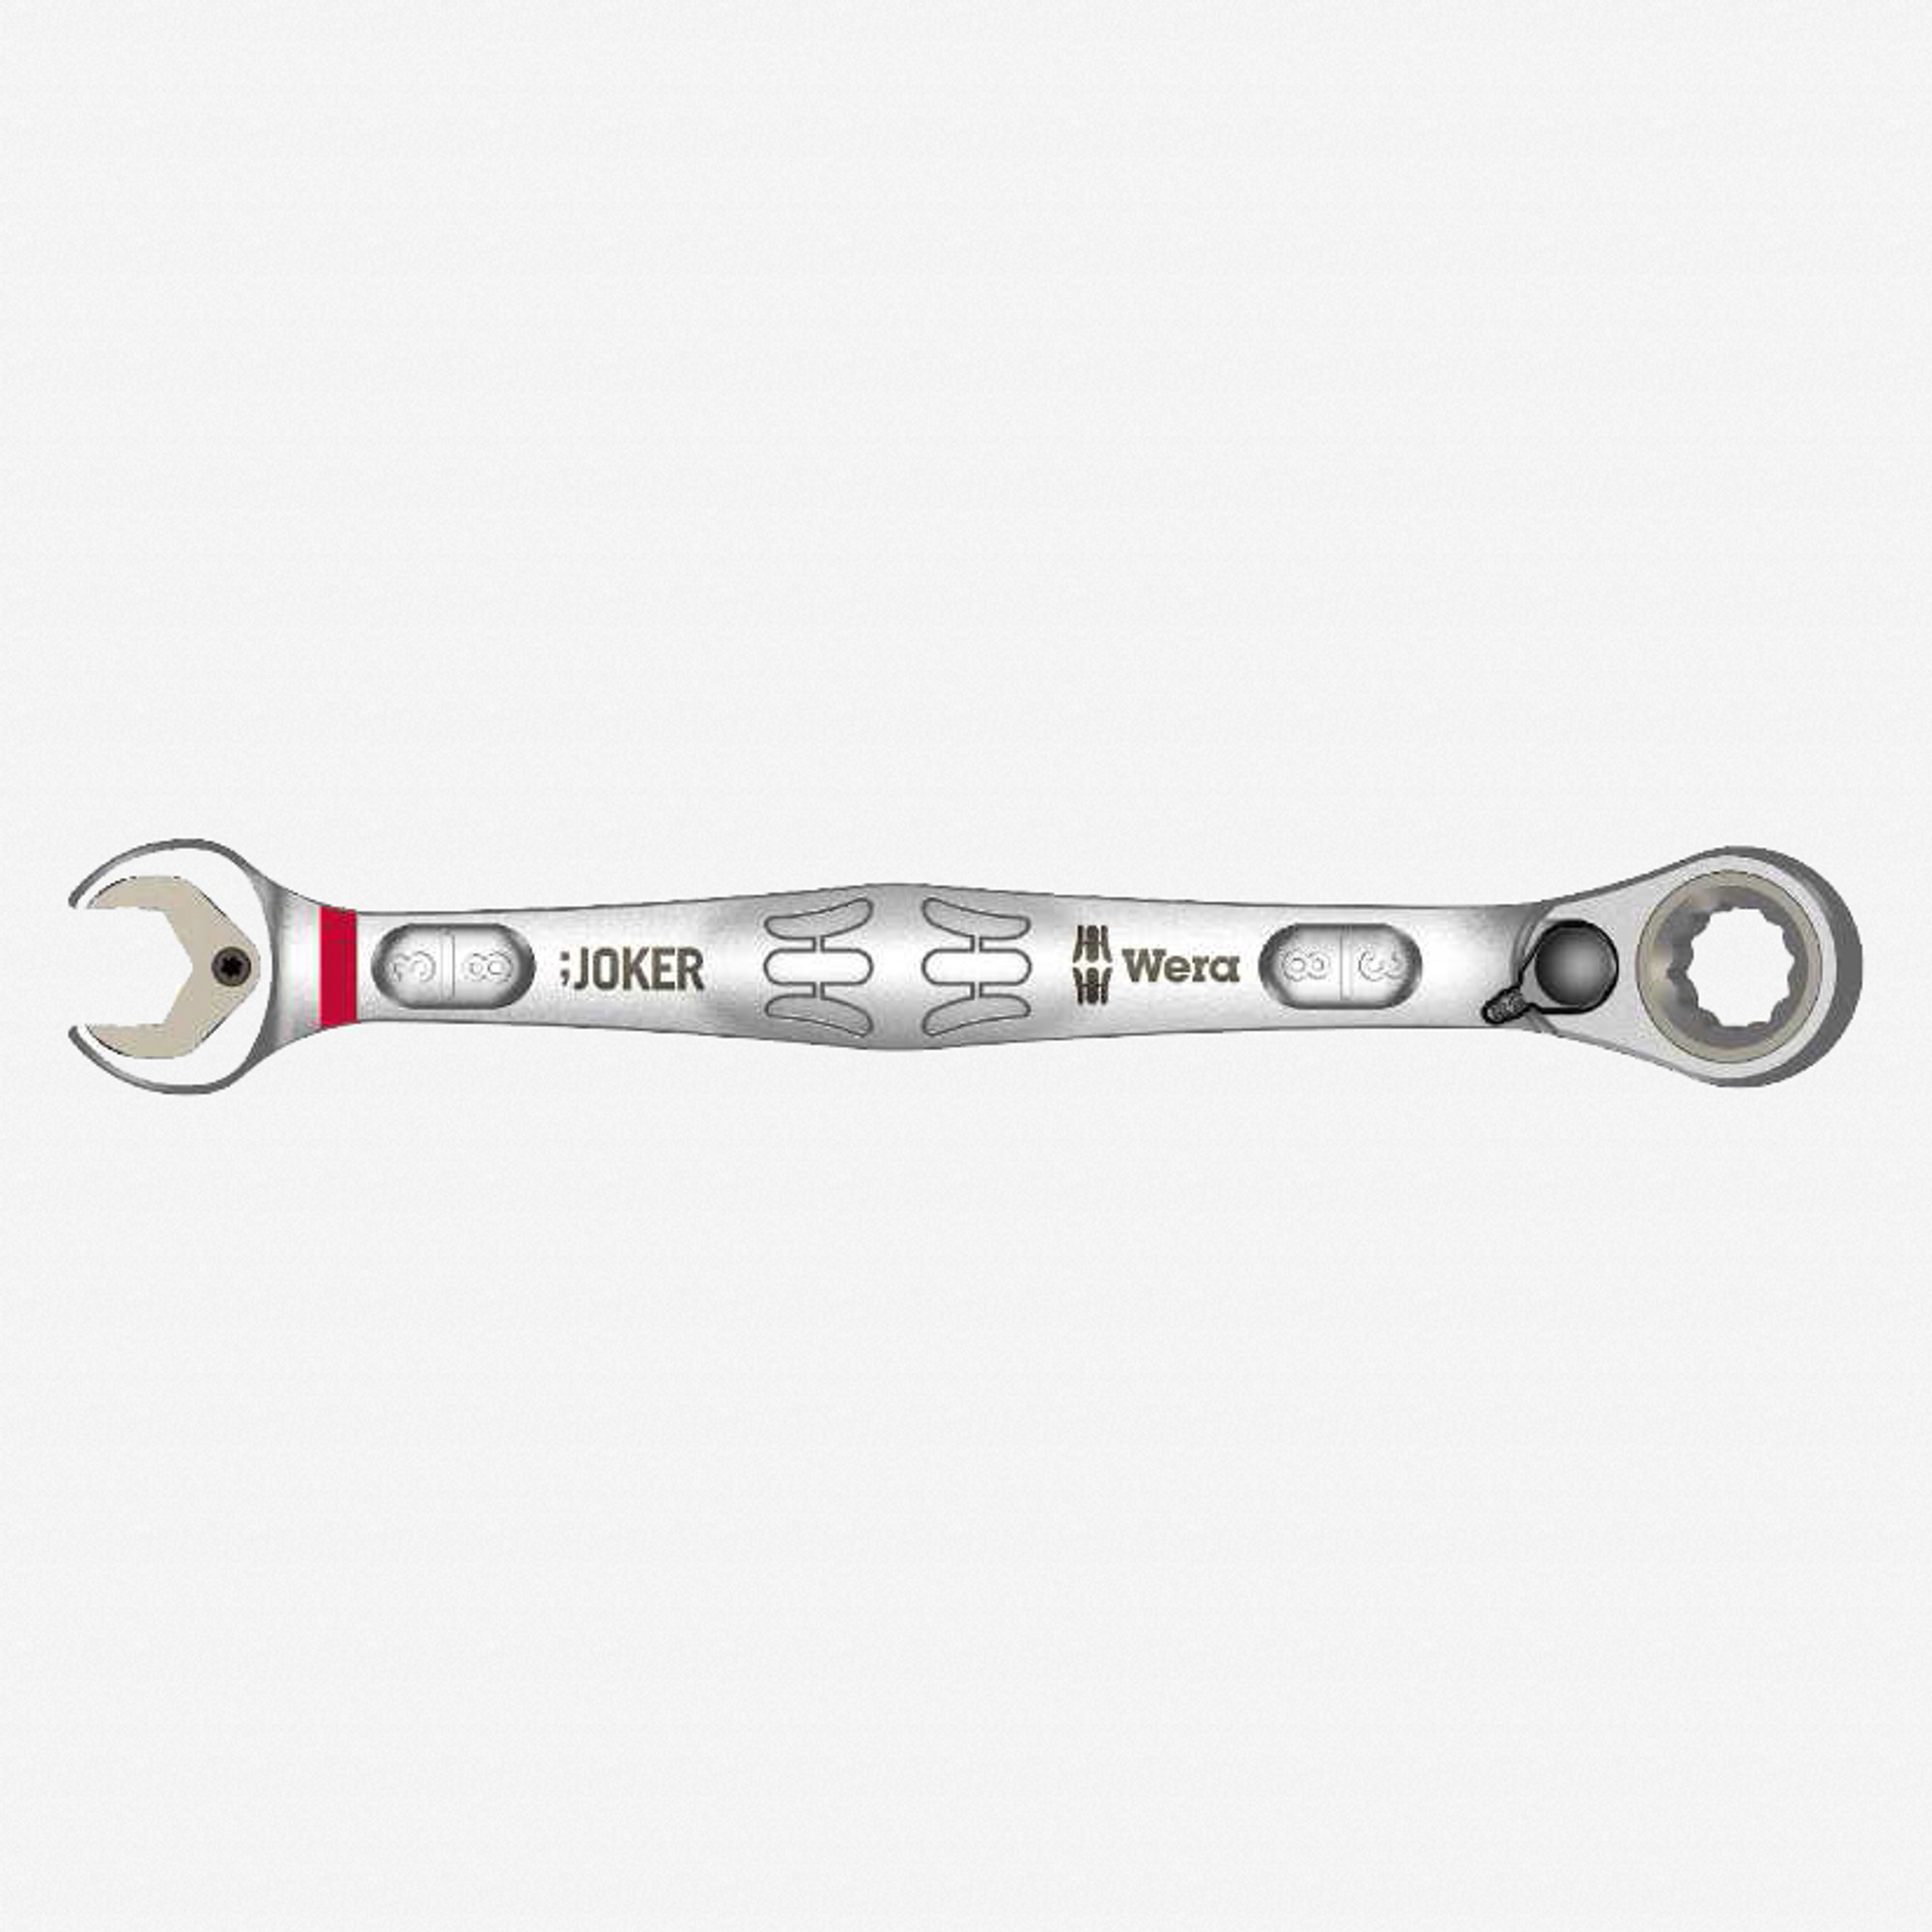 Wera Tools 020076 Joker Combination Wrench with Switch - 3/8